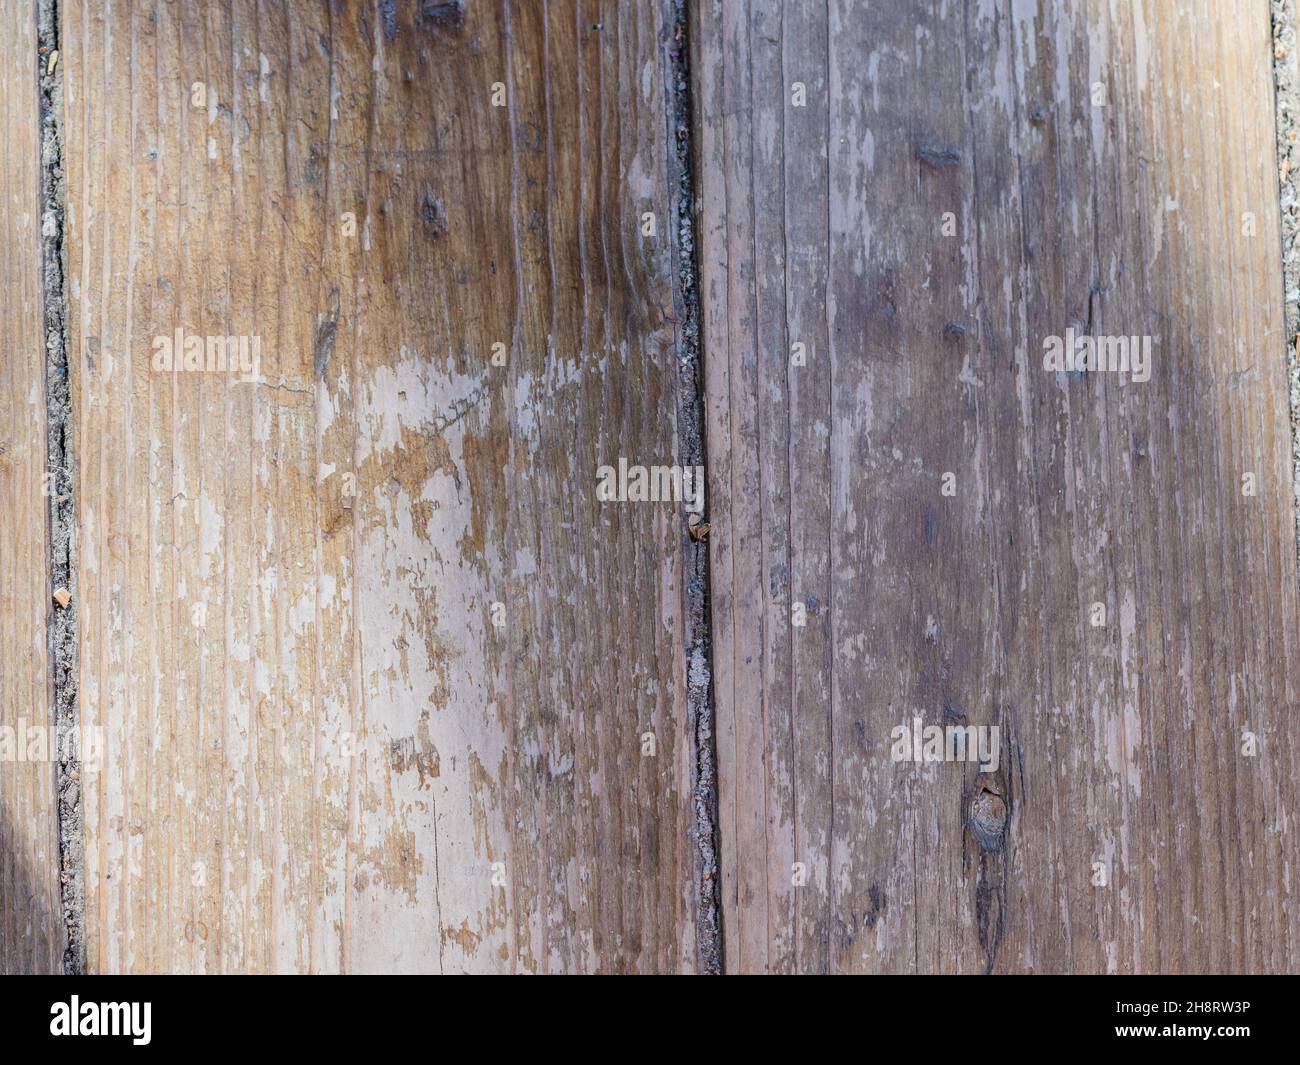 rough light wooden background made of planks Stock Photo